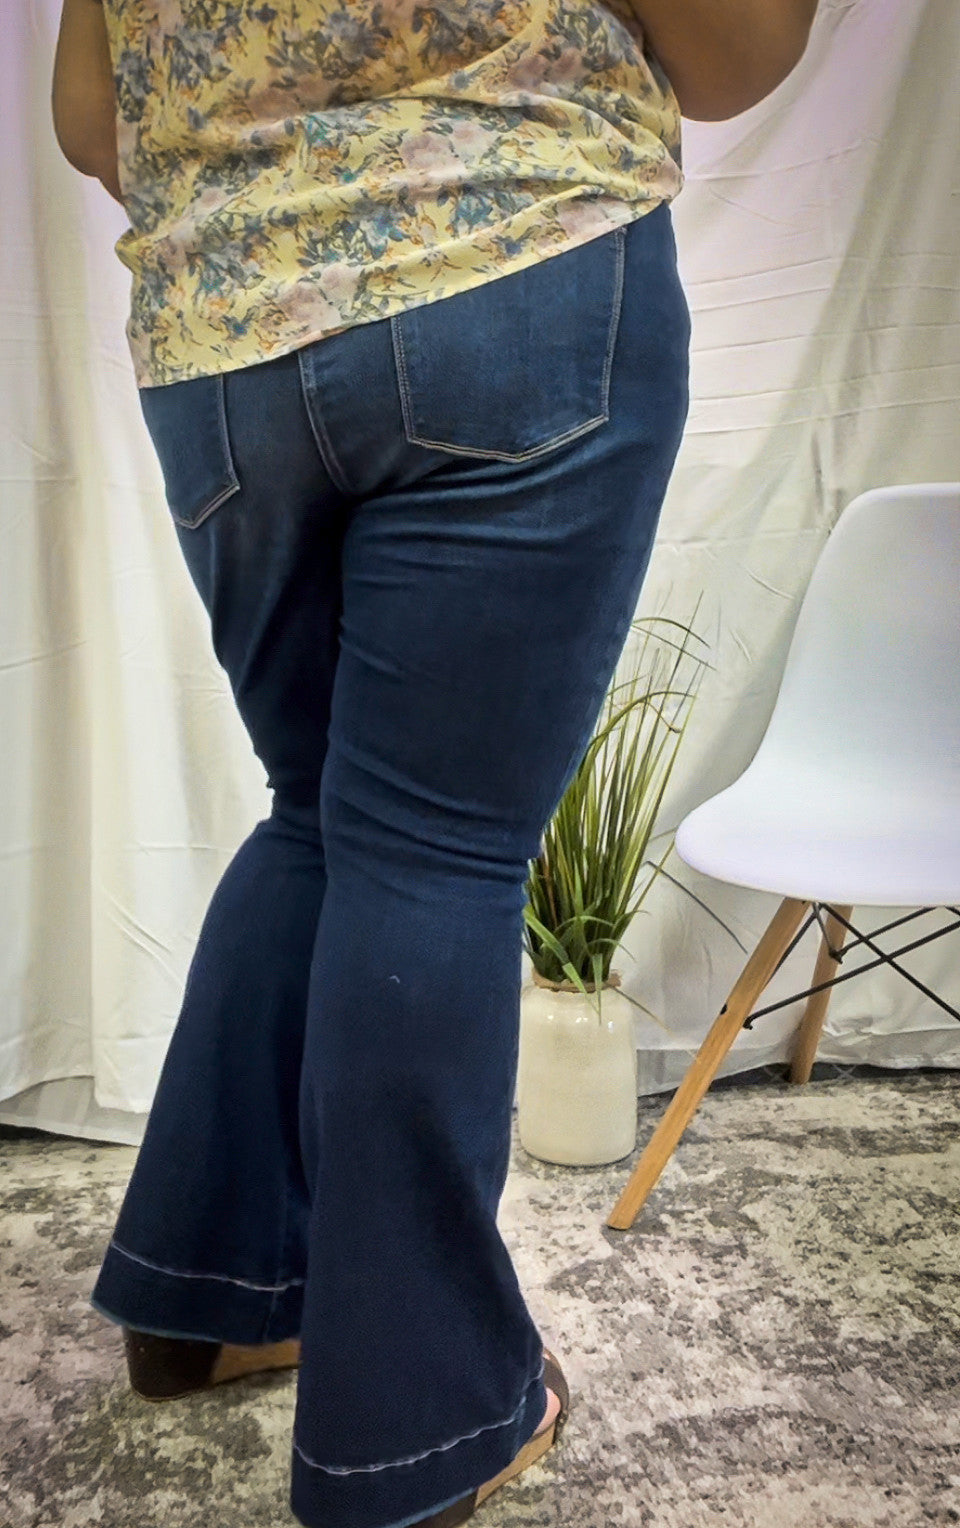 Hyde Jeans - Judy Blue High Rise Flares